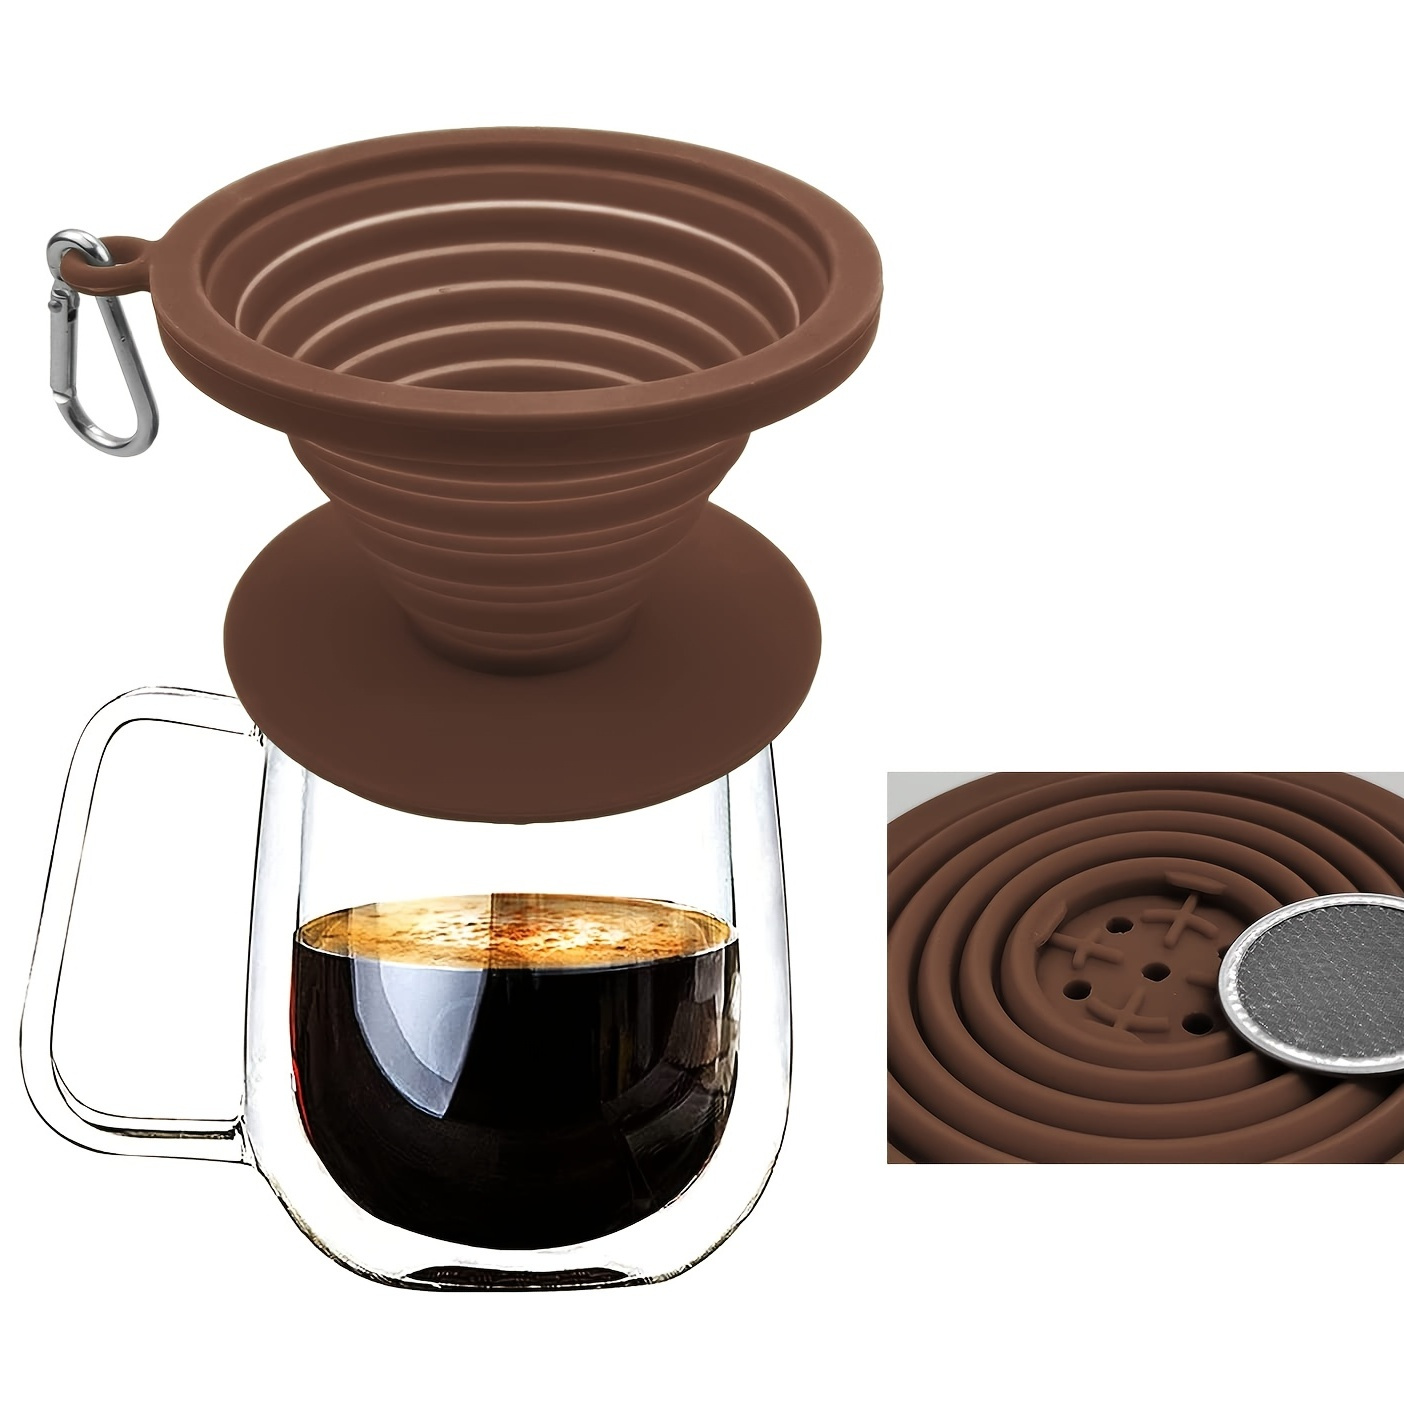 https://img.kwcdn.com/product/pour-over-coffee-filter/d69d2f15w98k18-b396dd20/1dab9a1a7c/b1828292-41b8-4196-ab70-ff864c1d7801_1404x1404.jpeg.a.jpg